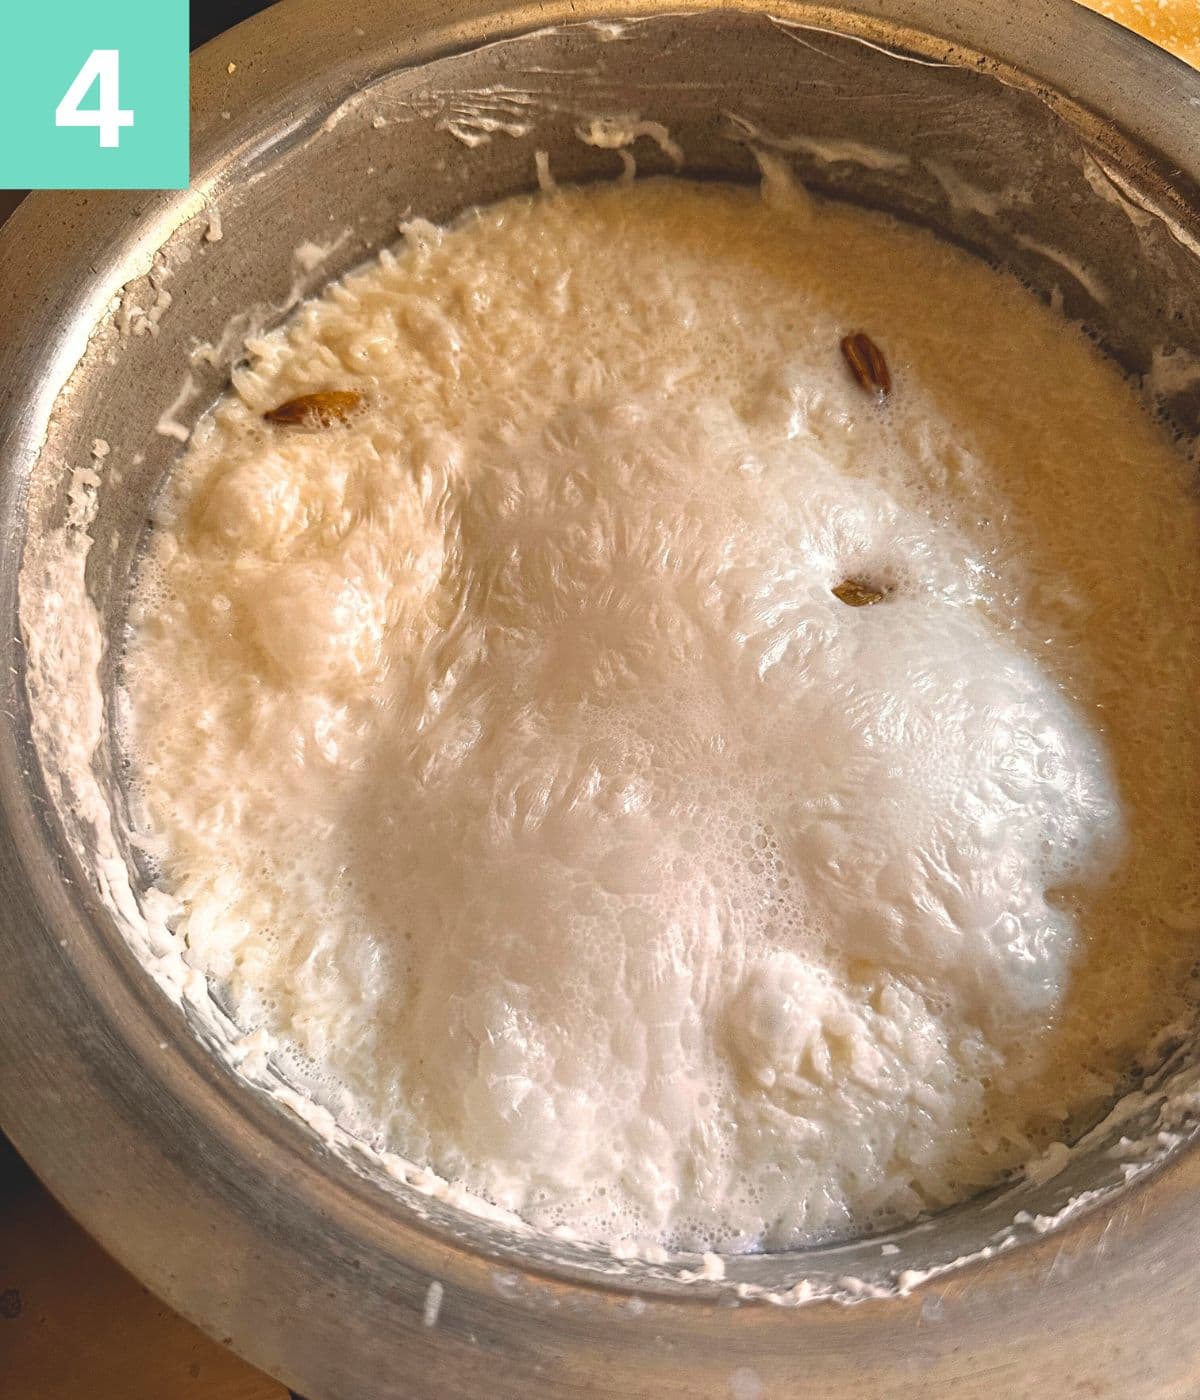 milk and rice boiling in a pot forming a crust on top